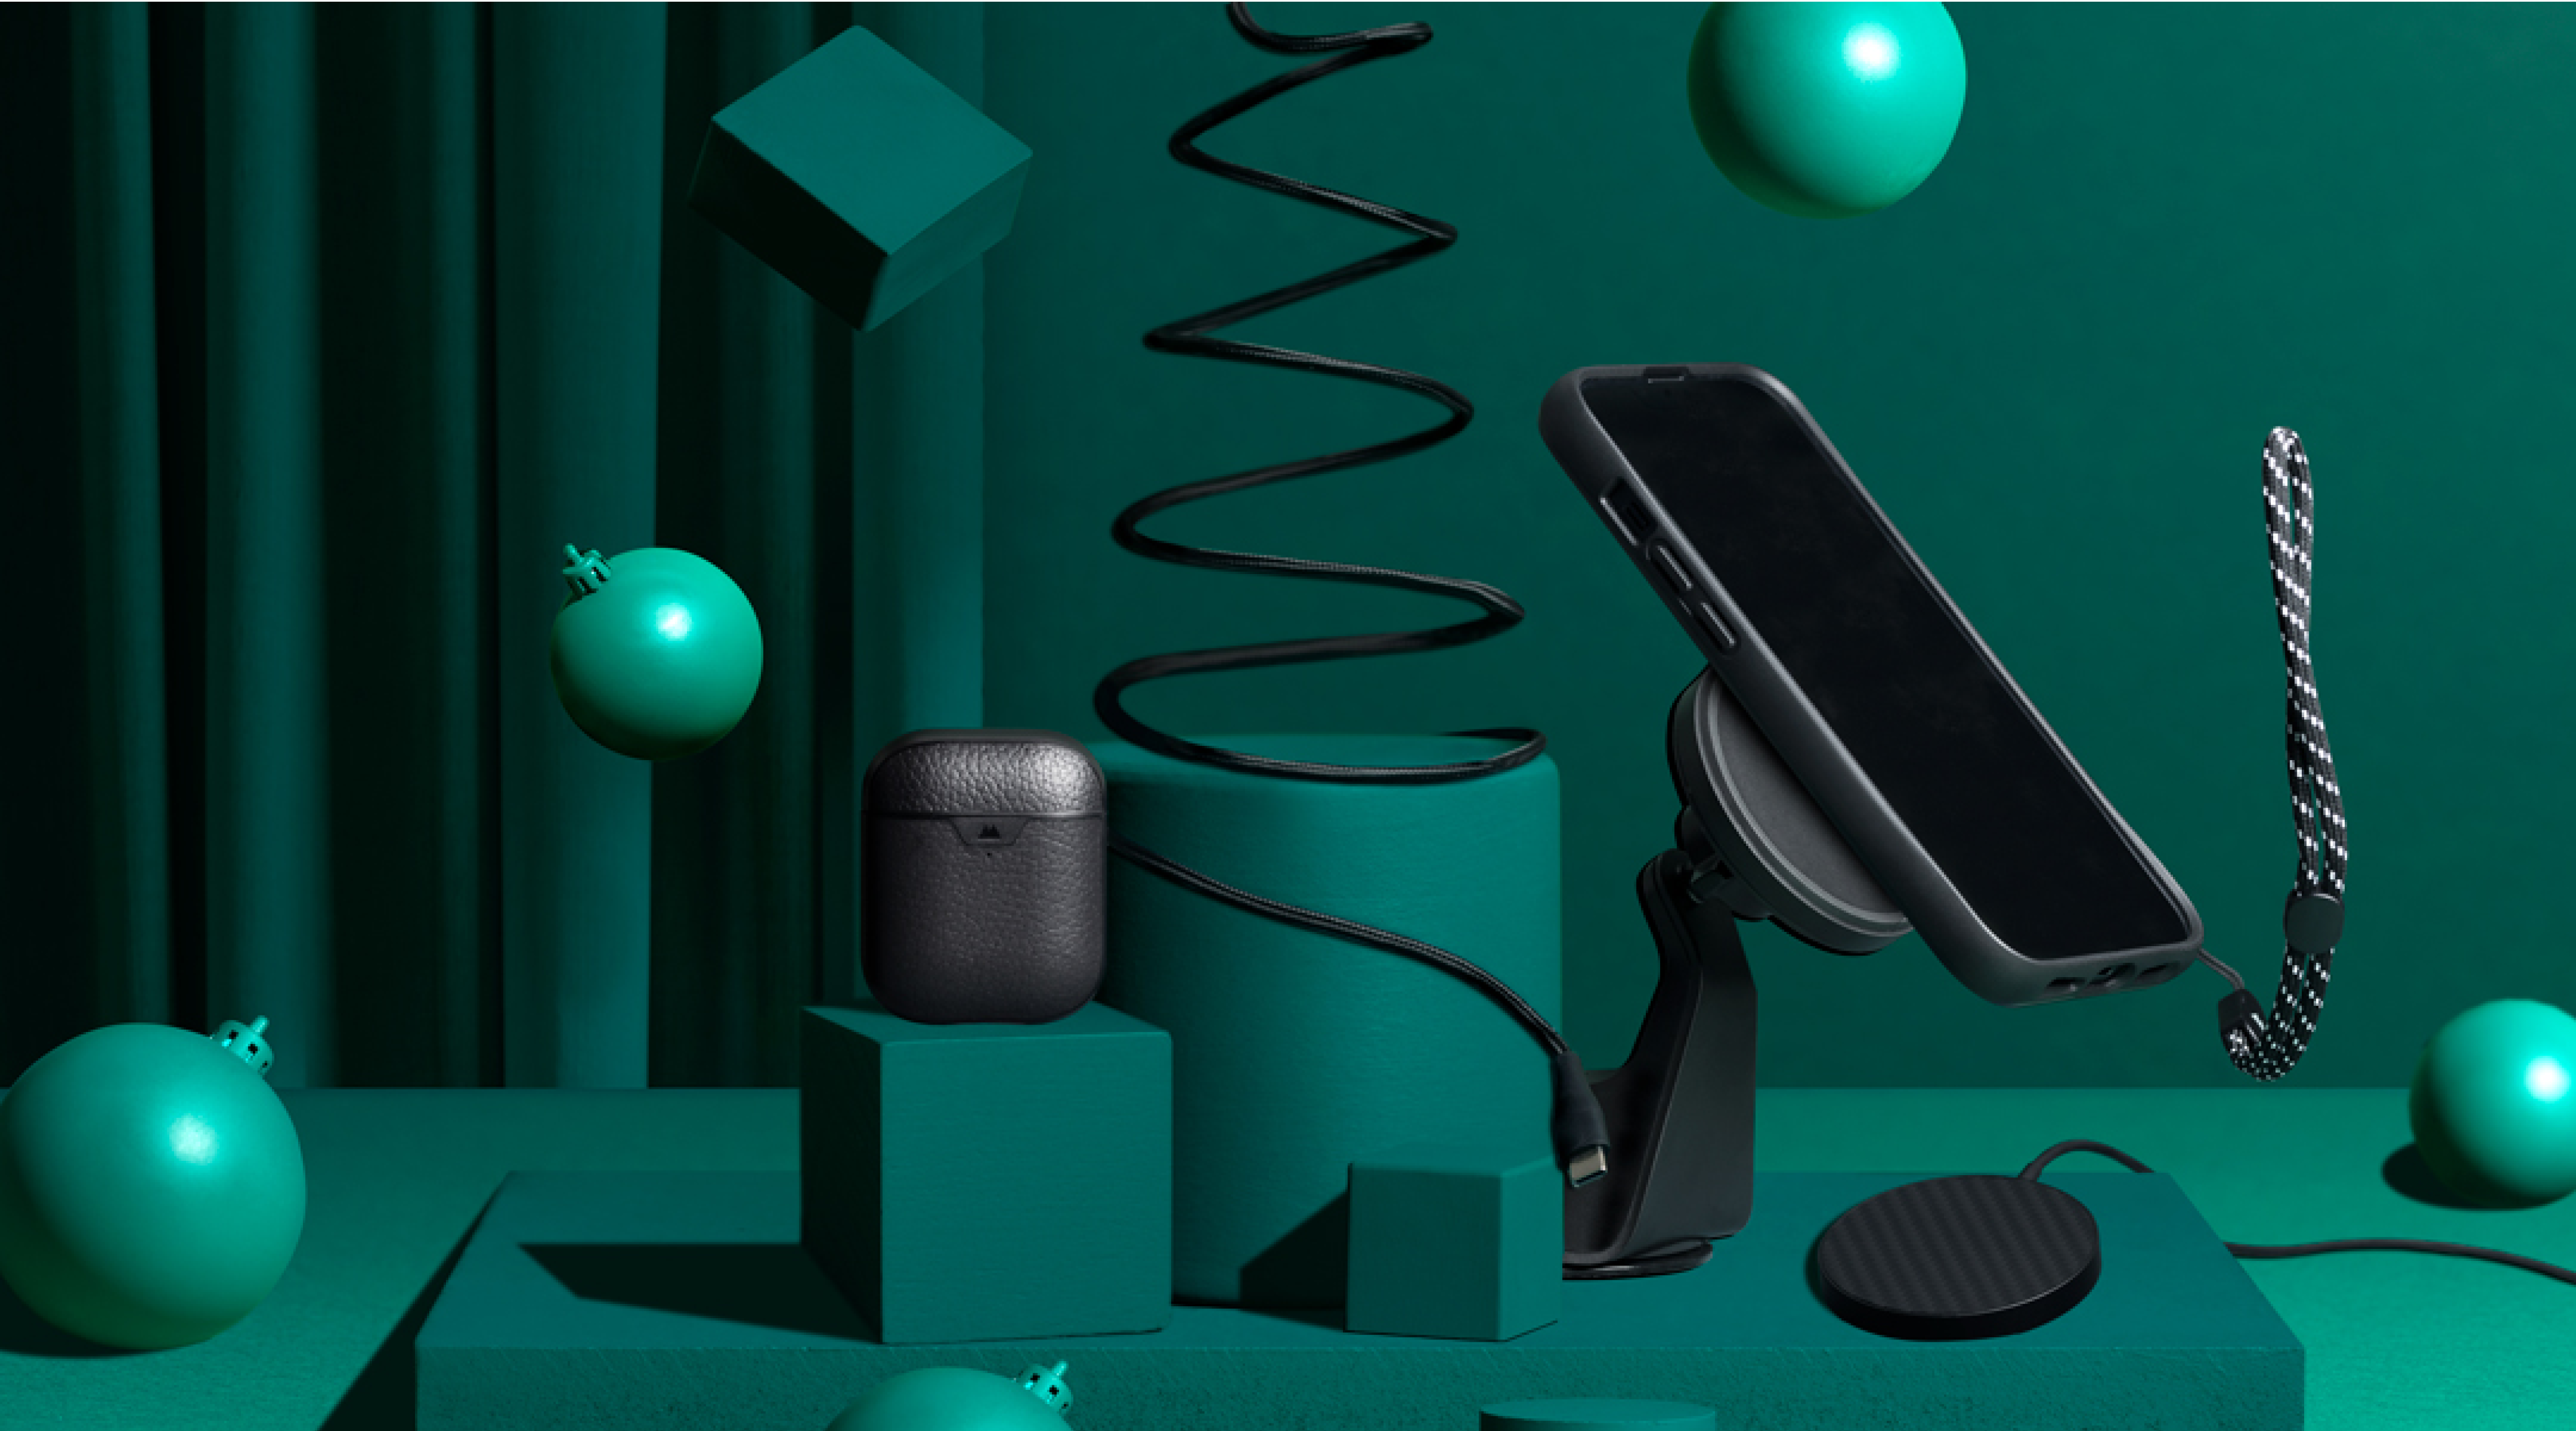 Mous ecosystem including protective phone case, AirPods case, MagSafe compatible wireless charger and christmas baubles